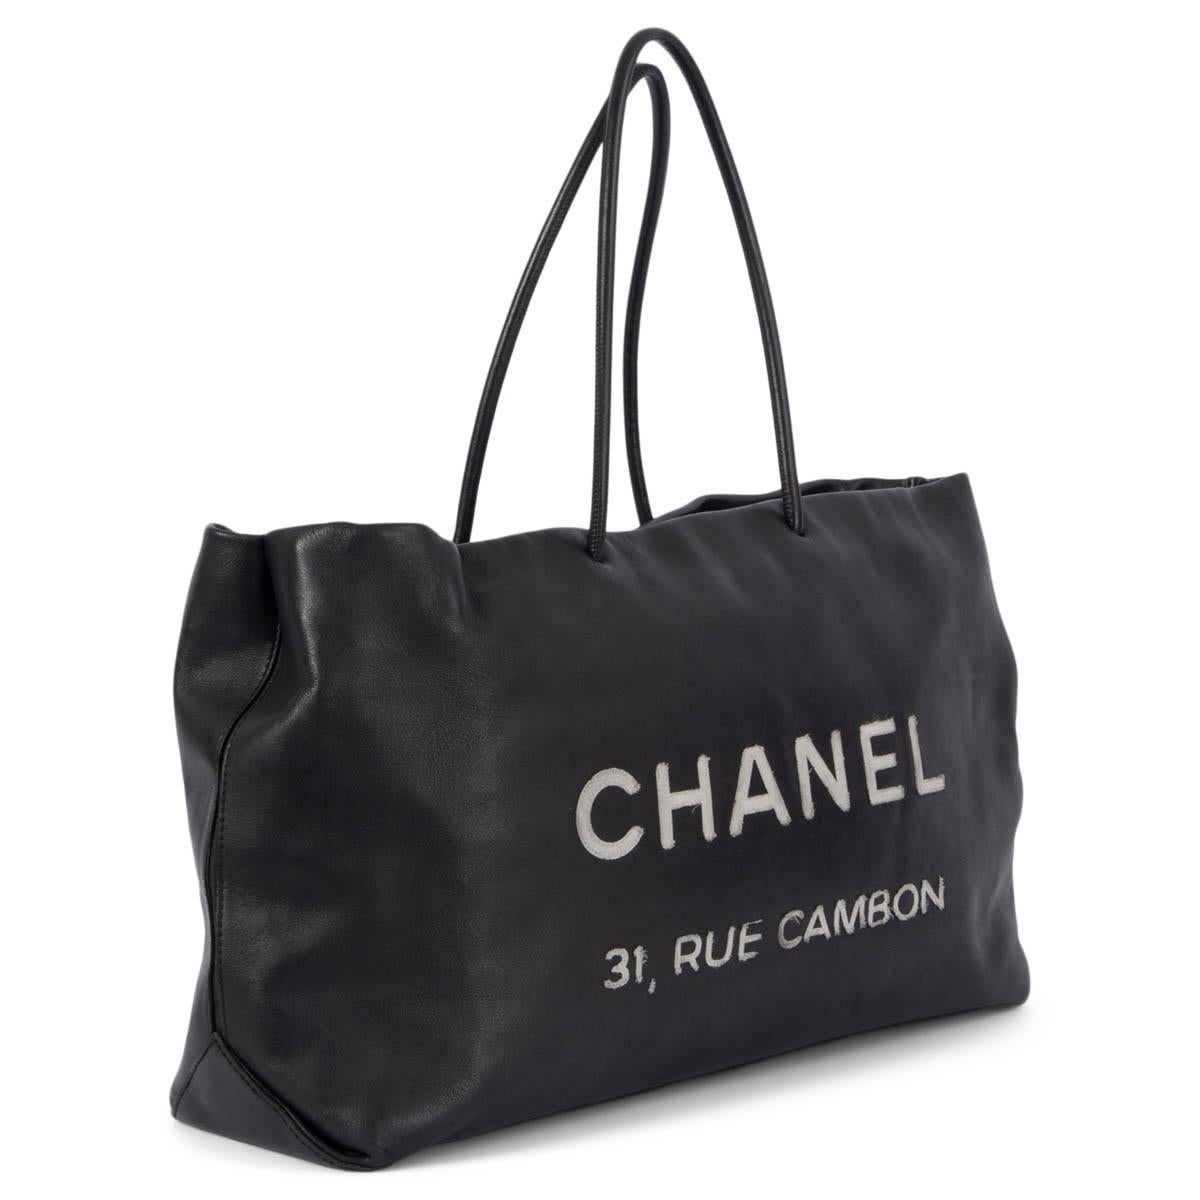 100% authentic Chanel Essential large tote bag in smooth black calfskin with slightly faded off-white stitched canvas logo lettering. Opens with a zipper on top and is lined in black & off-white printed nylon with one bit zipper pocket against the